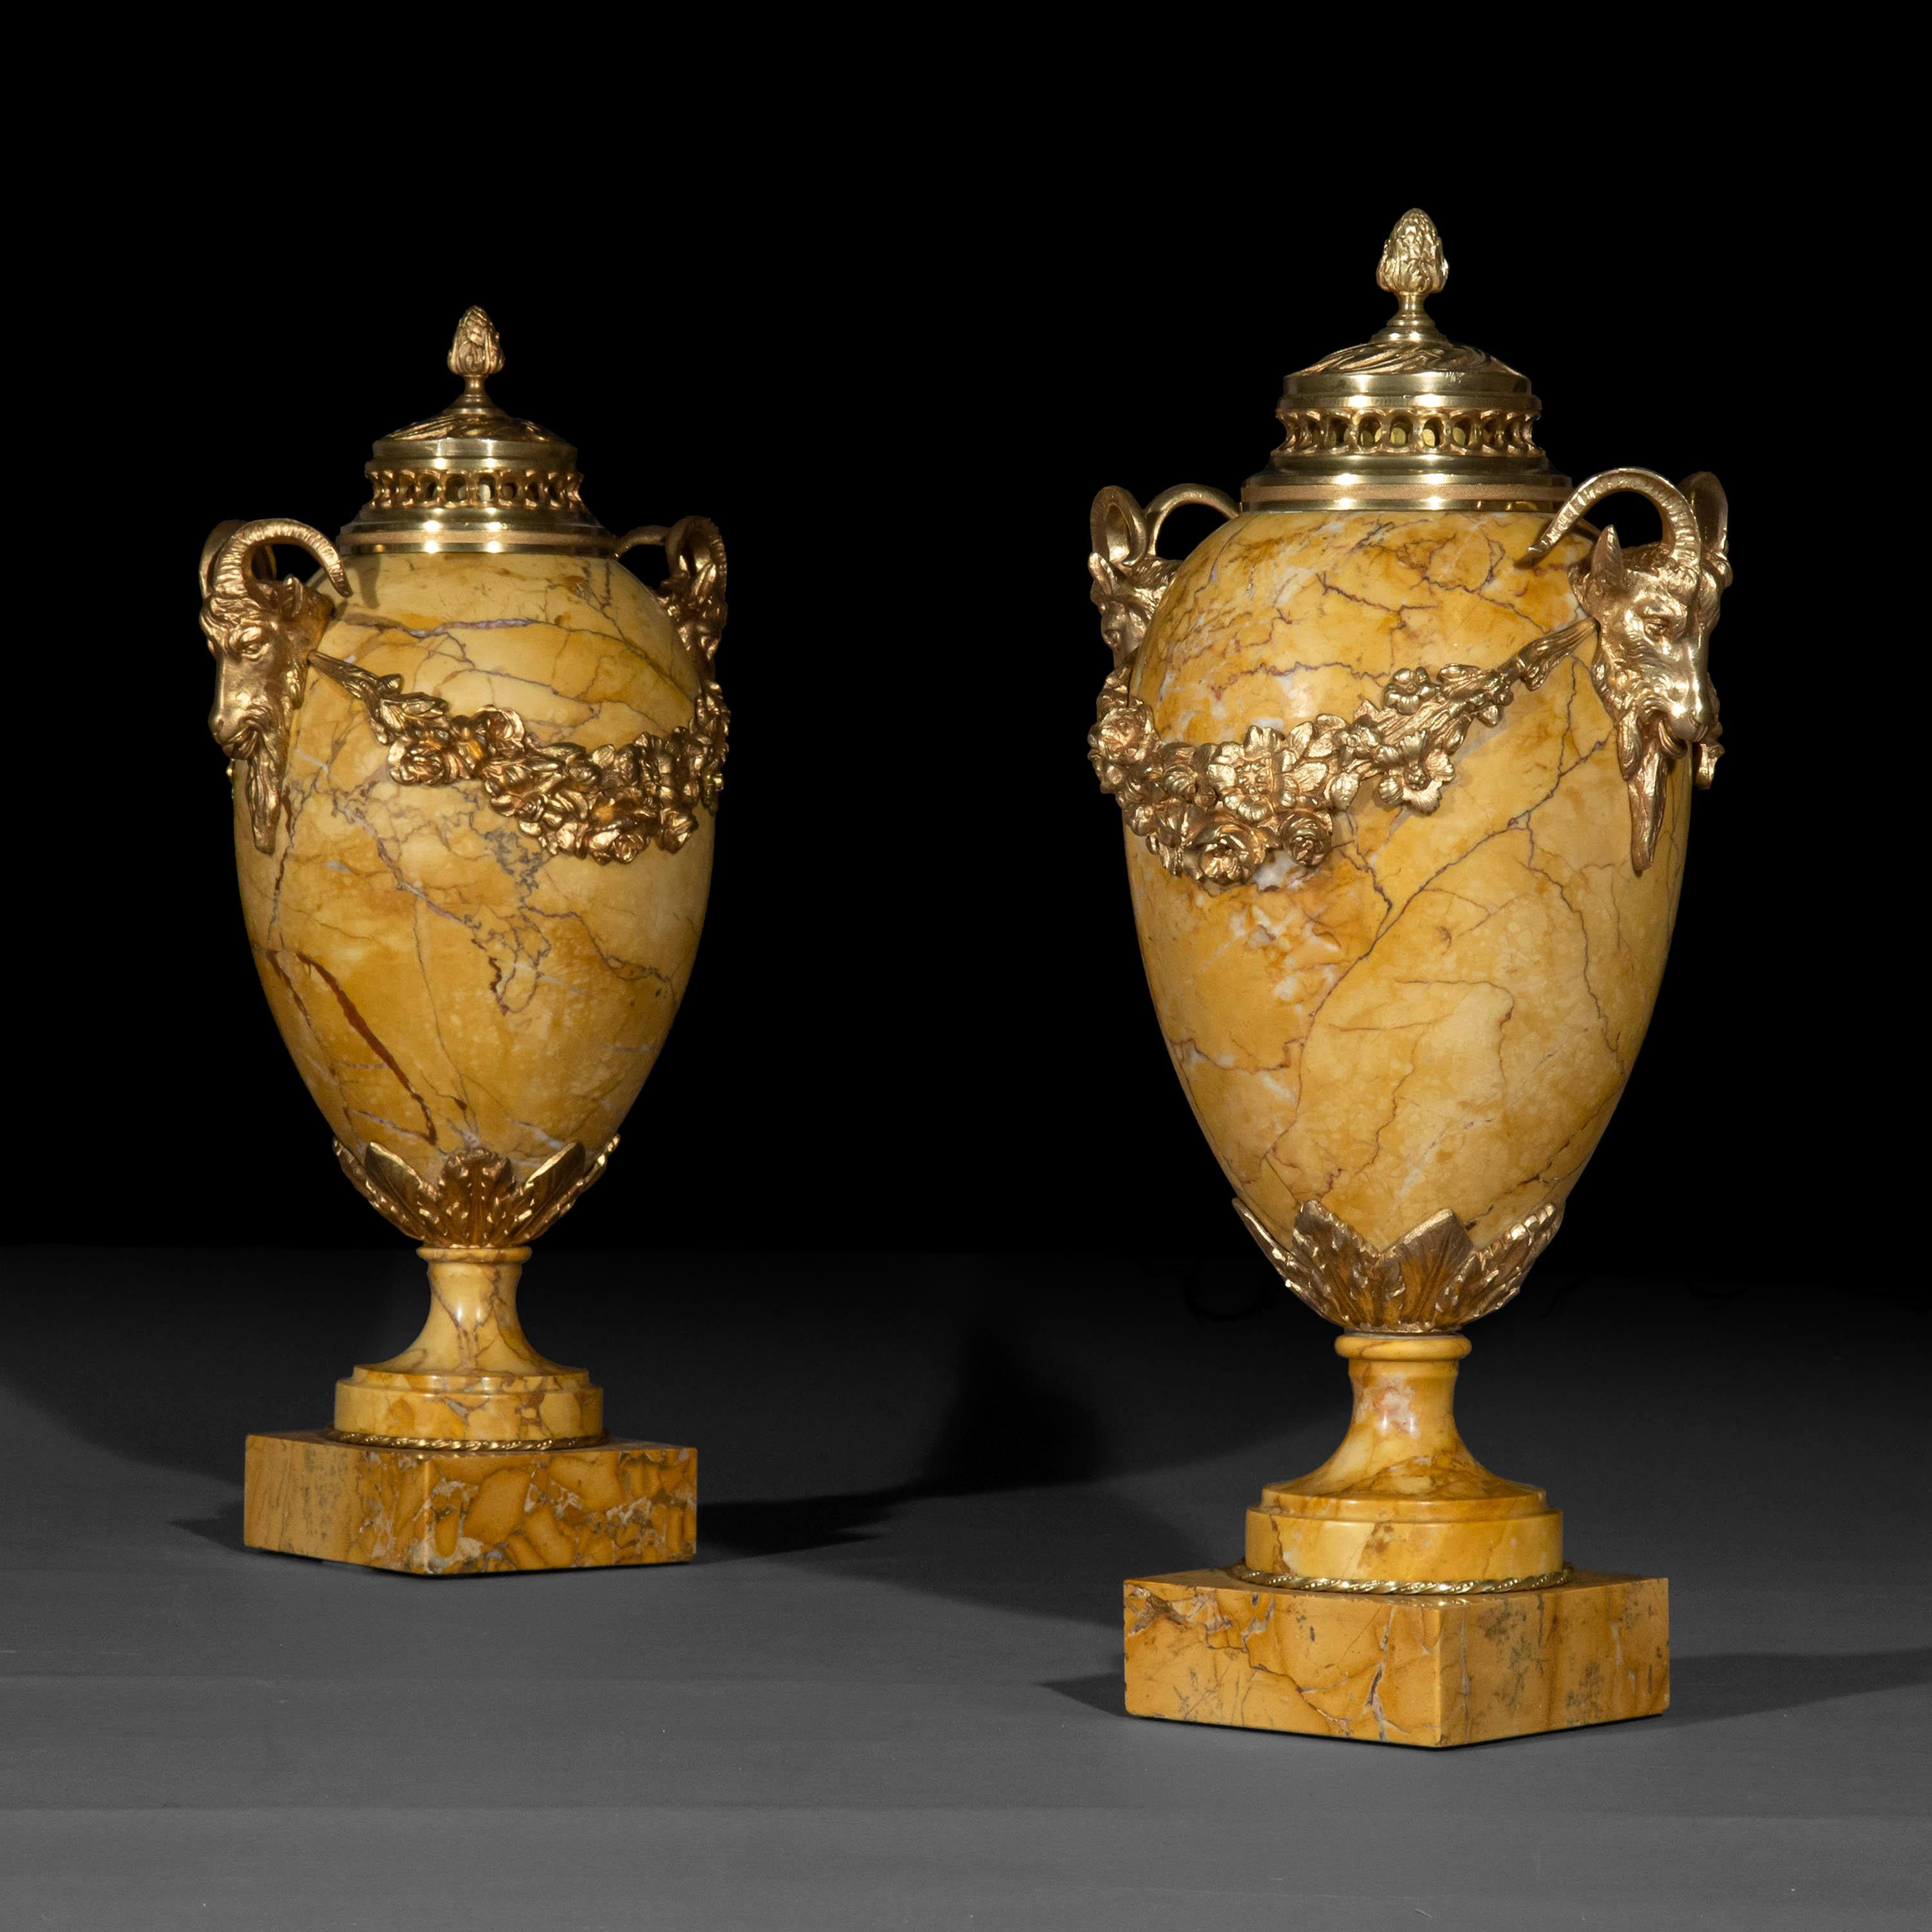 Neoclassical Revival Pair of Antique Neoclassical Siena Marble Urns with Gilt Bronze Mounts For Sale